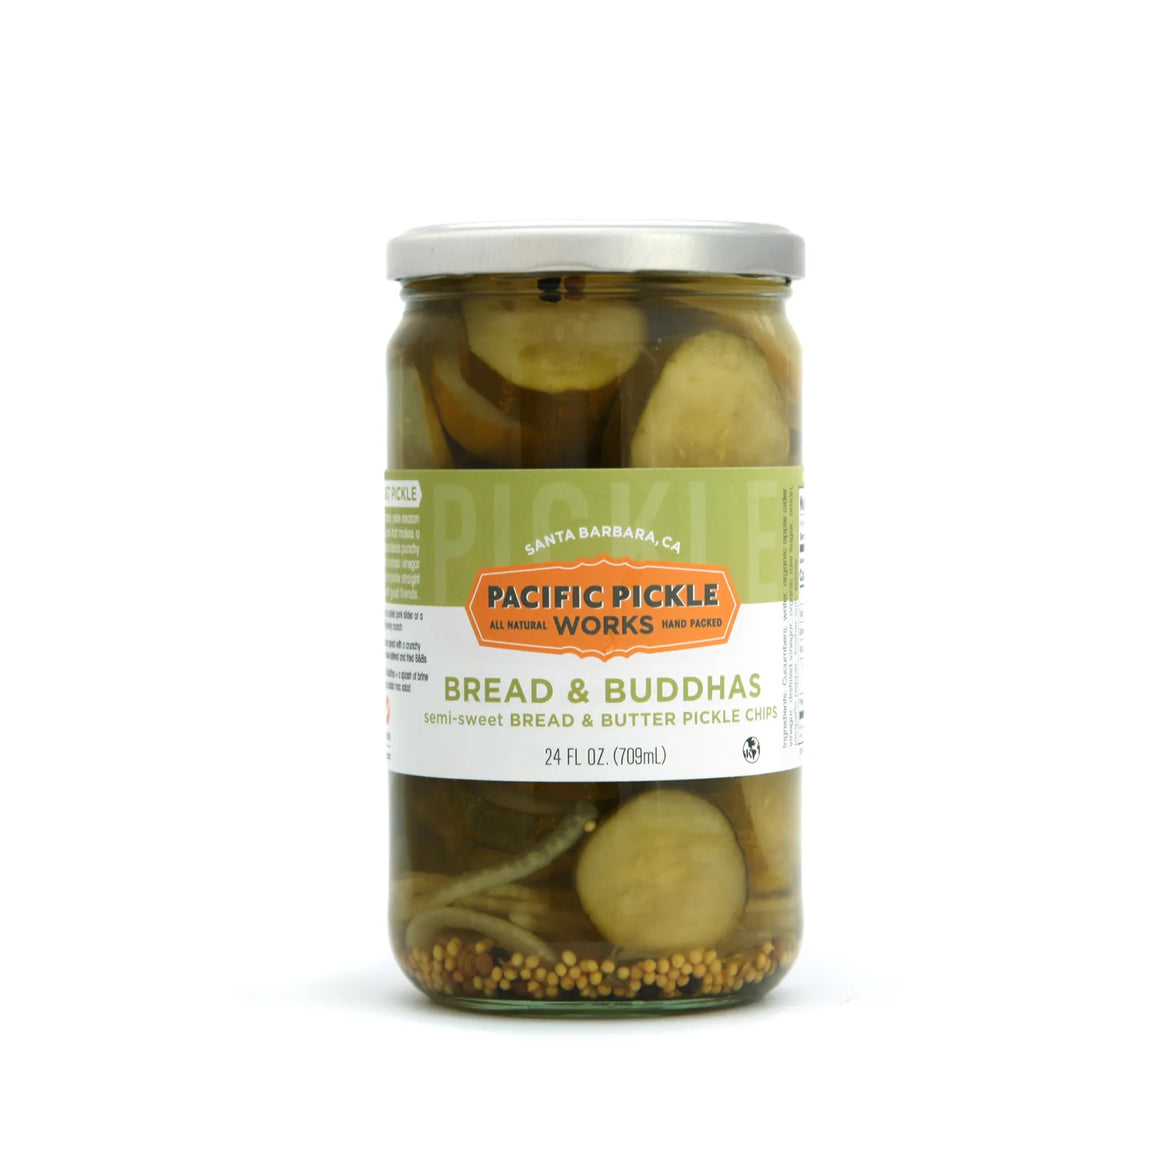 Pacific Pickle Works - Bread & Buddhas